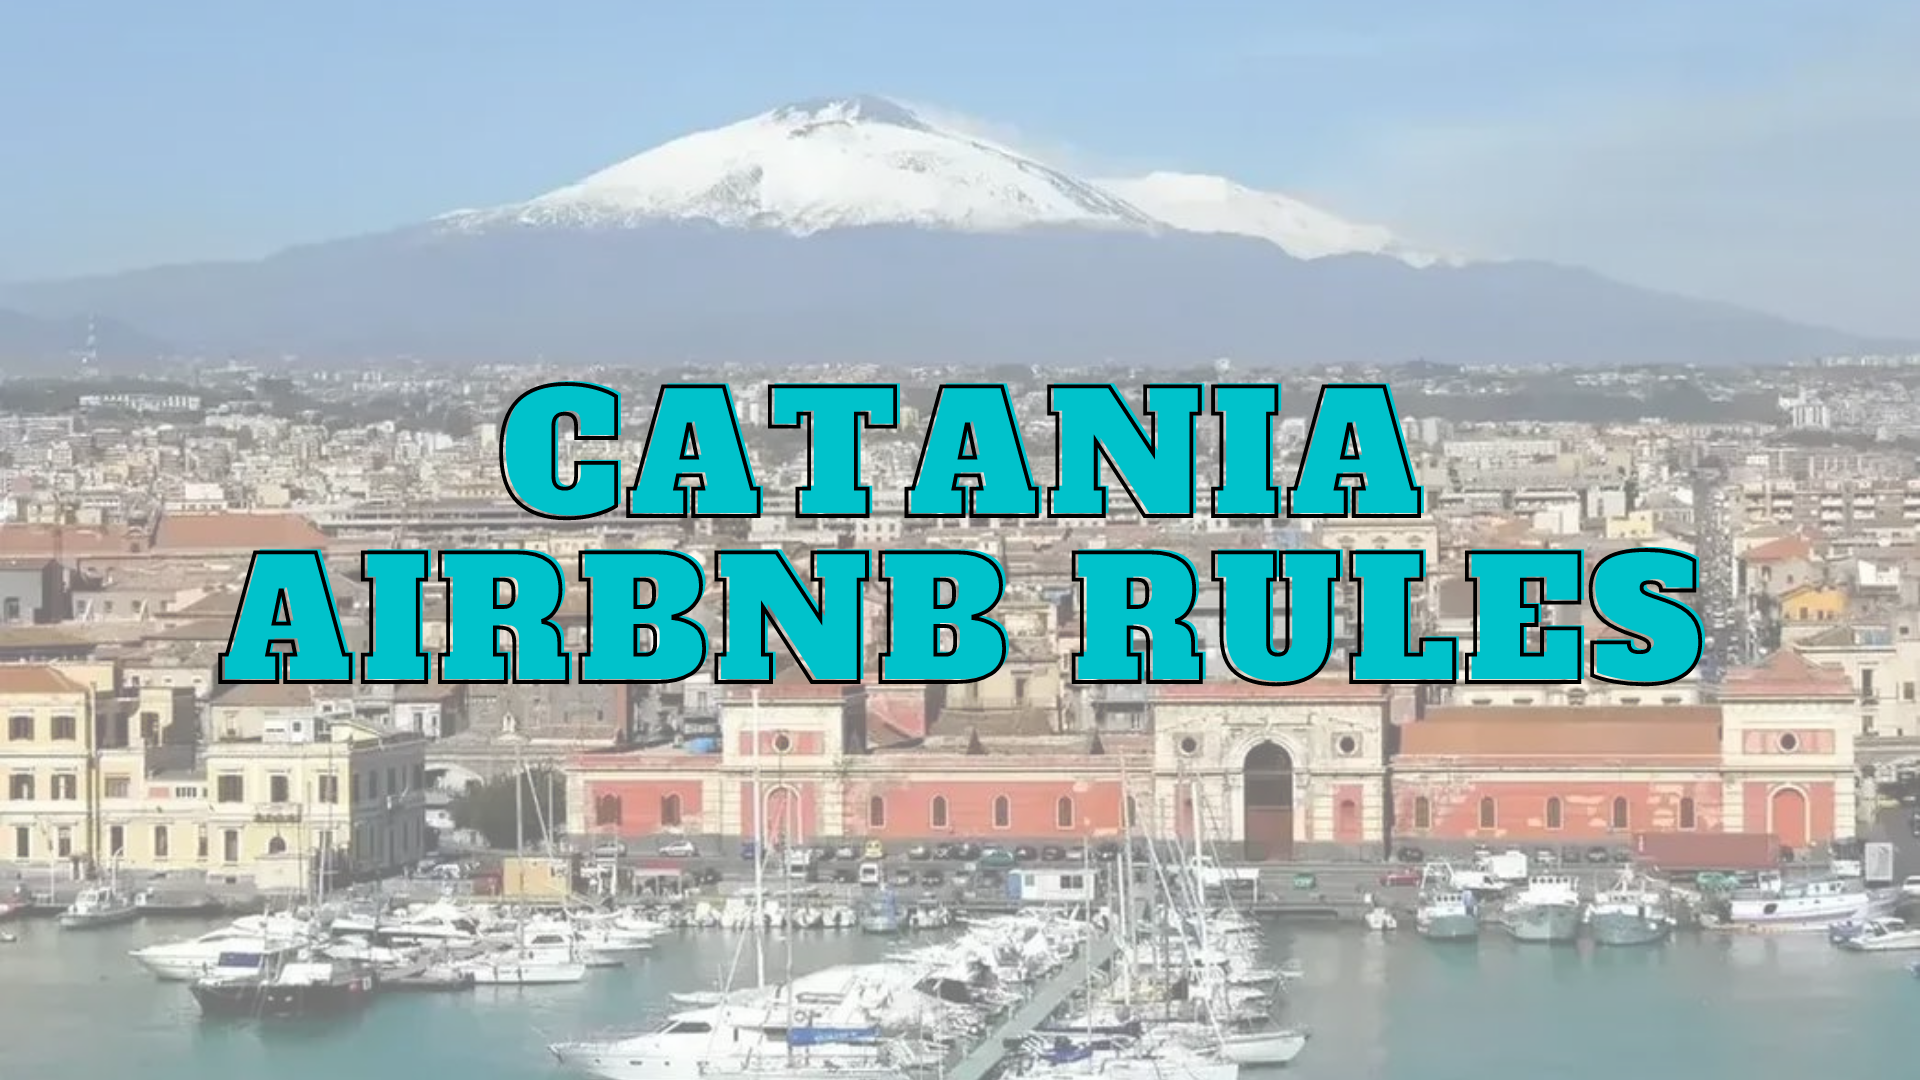 Catania Airbnb Rules